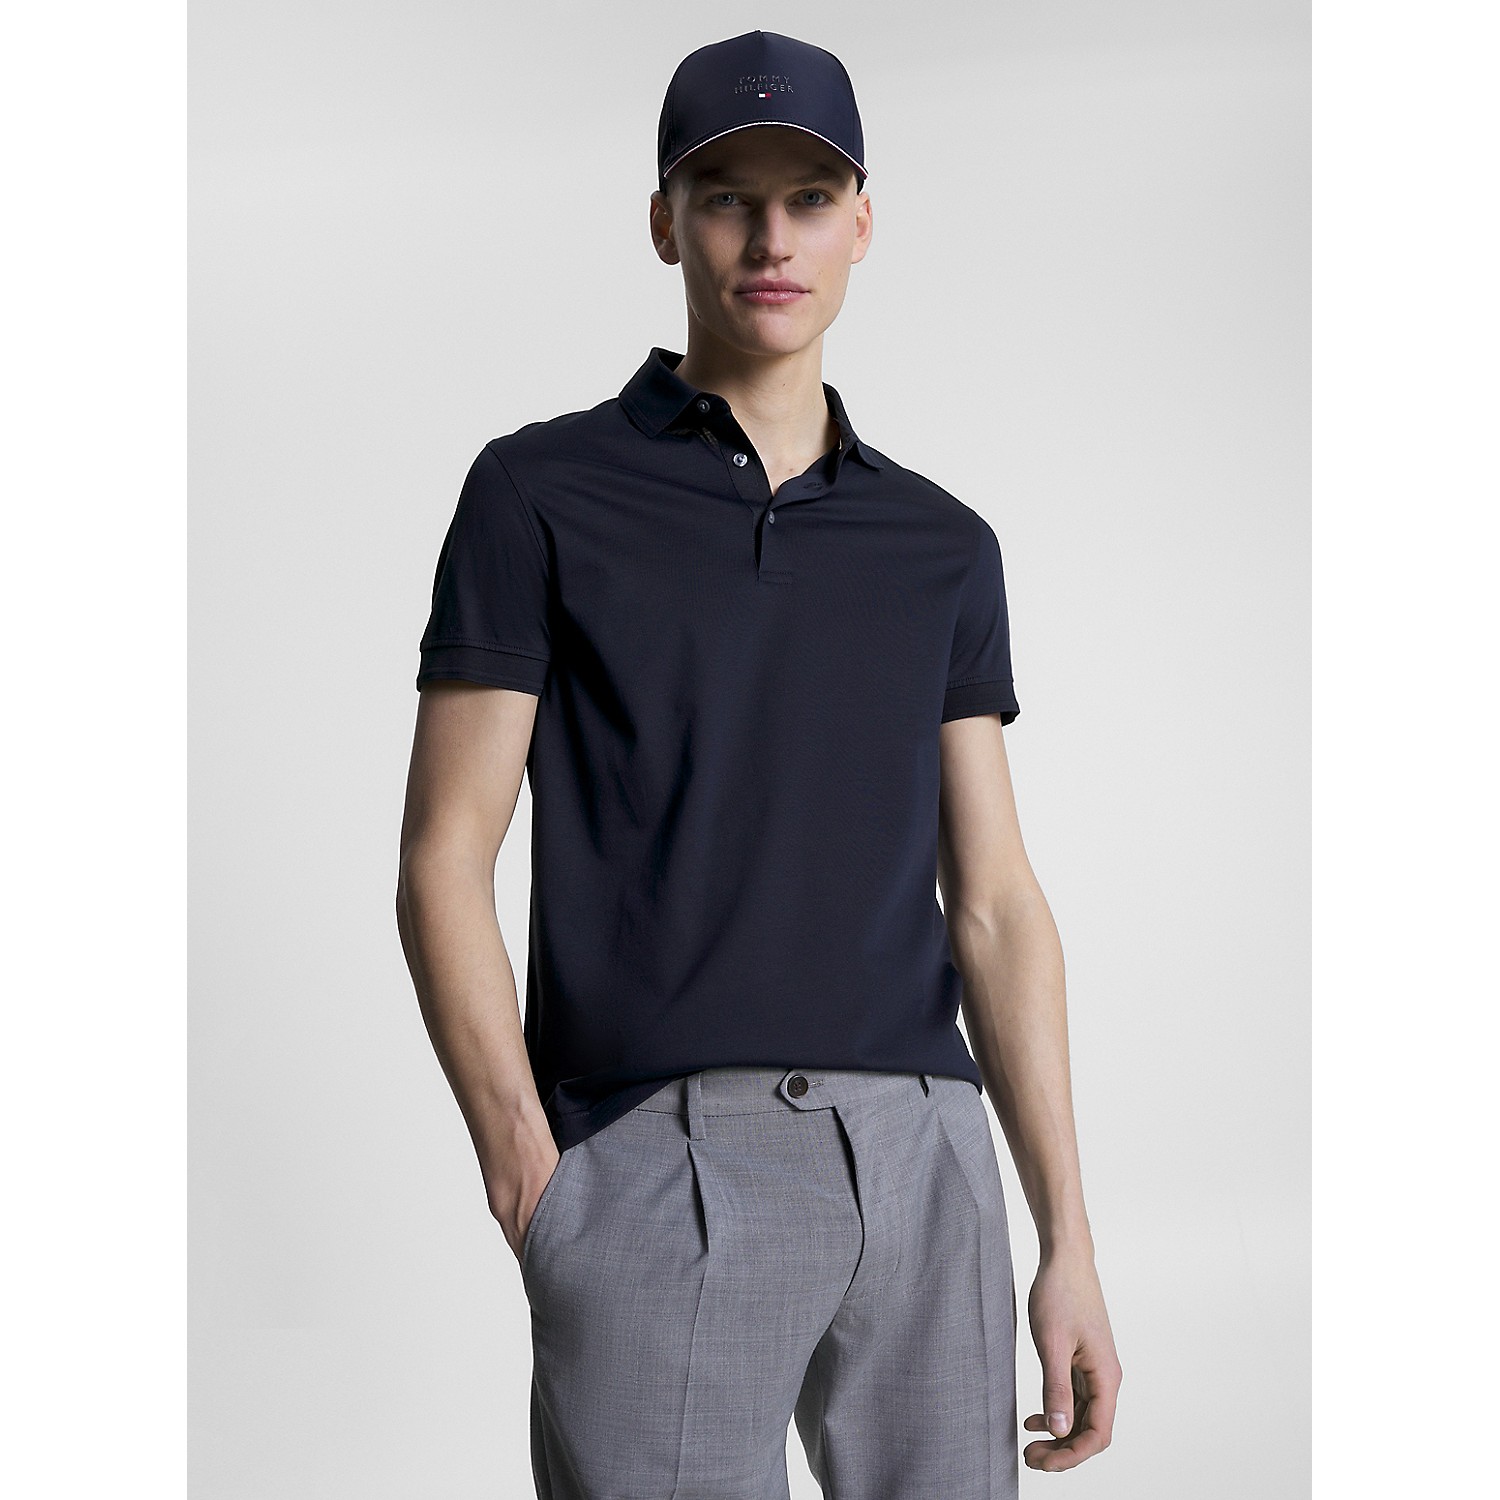 TOMMY HILFIGER Slim Fit Solid Mercerized Polo